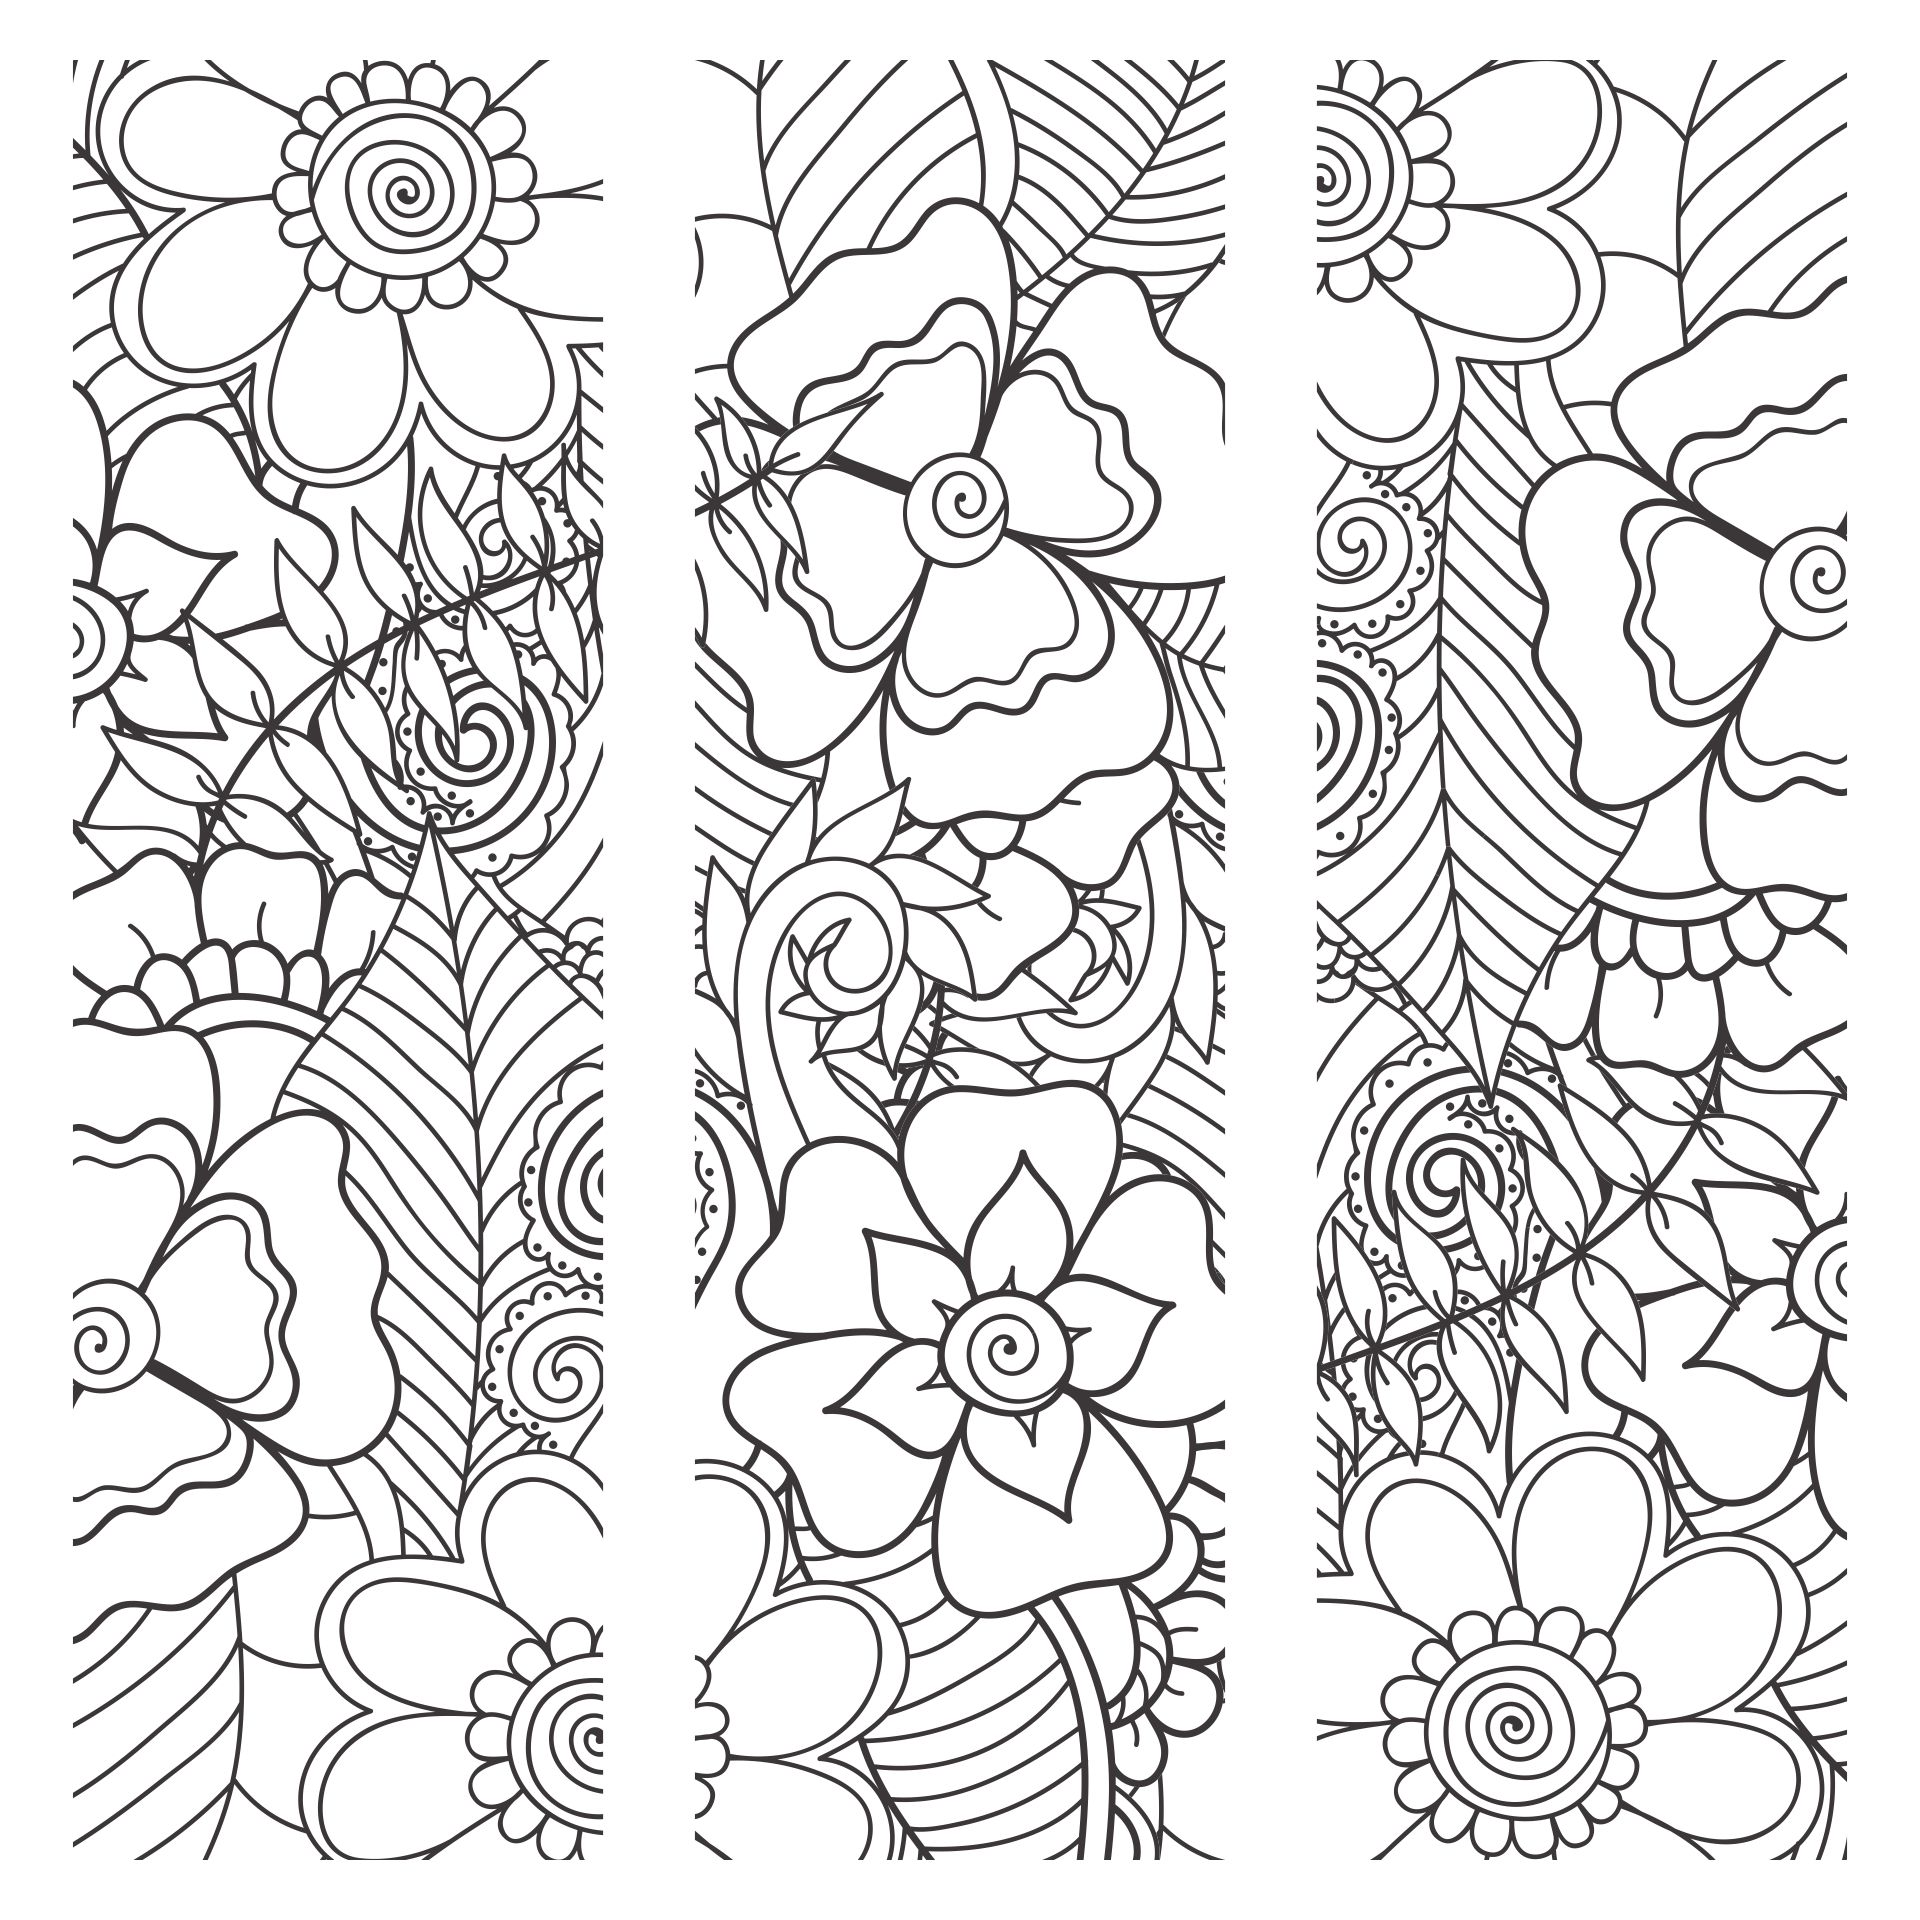 Printable Zentangle Patterns For Beginners